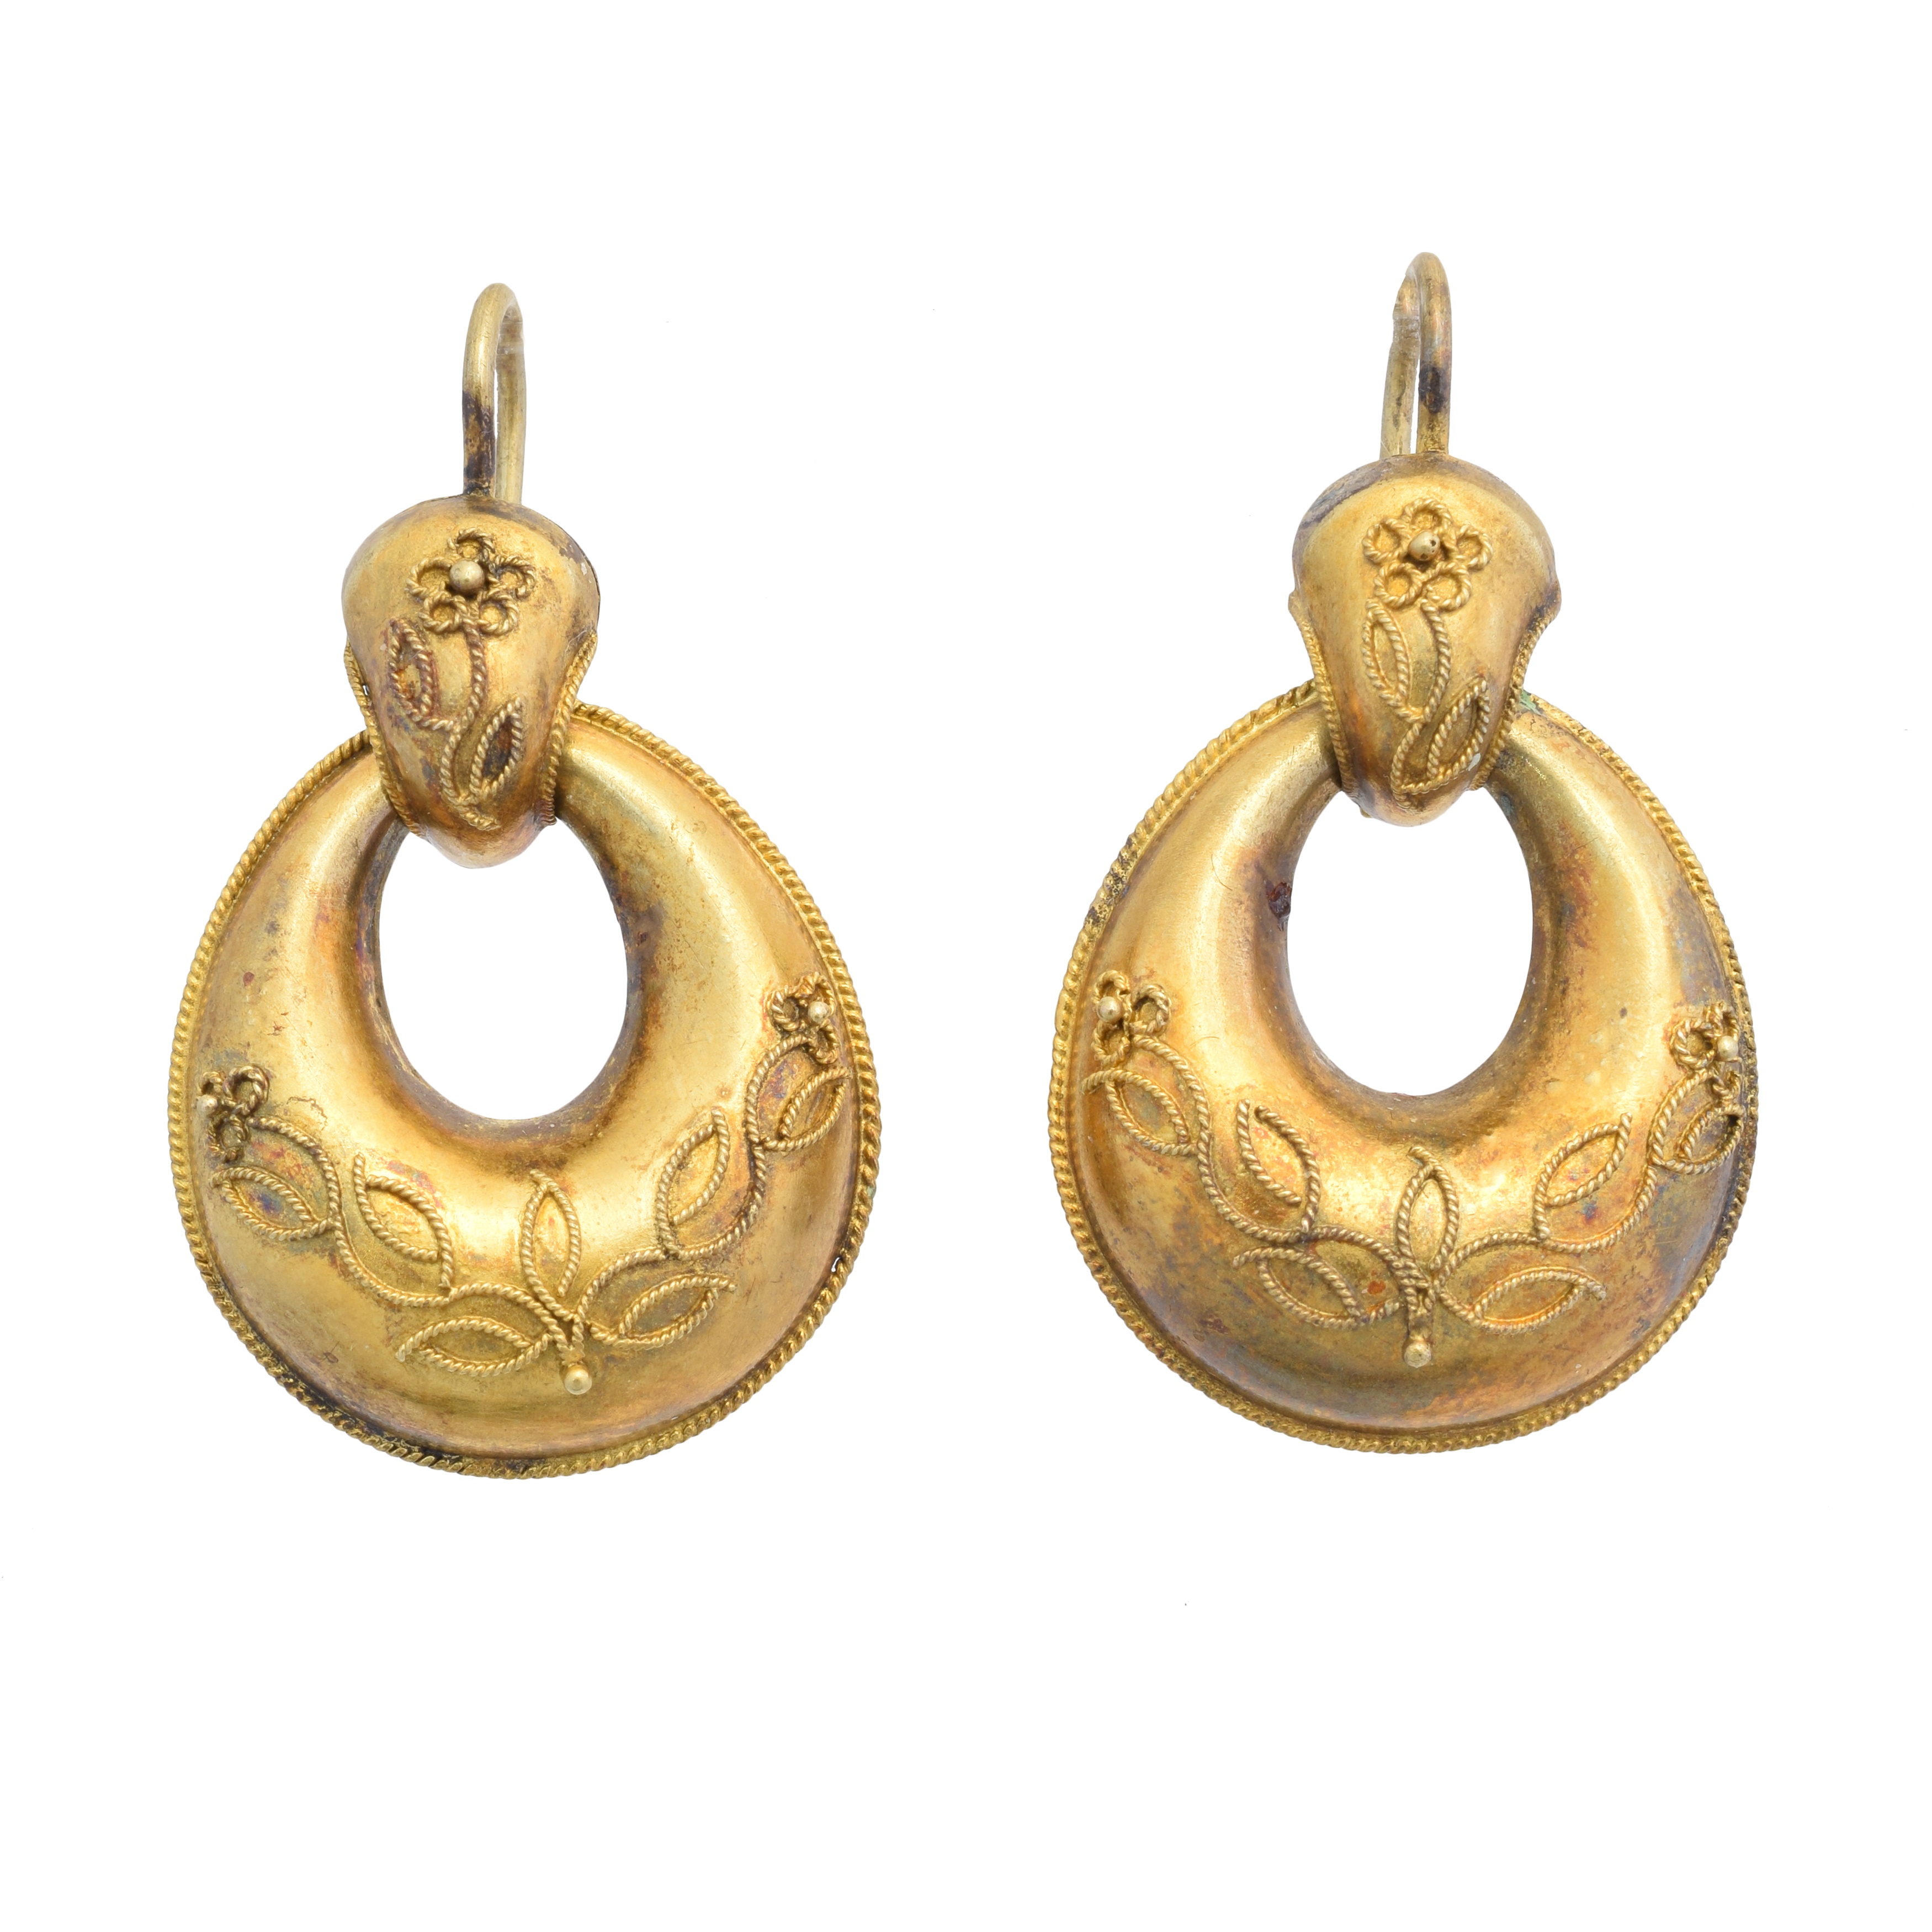 A pair of Victorian drop earrings, each designed as a cannetille hoop suspended from a floral tapered surmount, length 3.4cm, gross weight 3.8g.